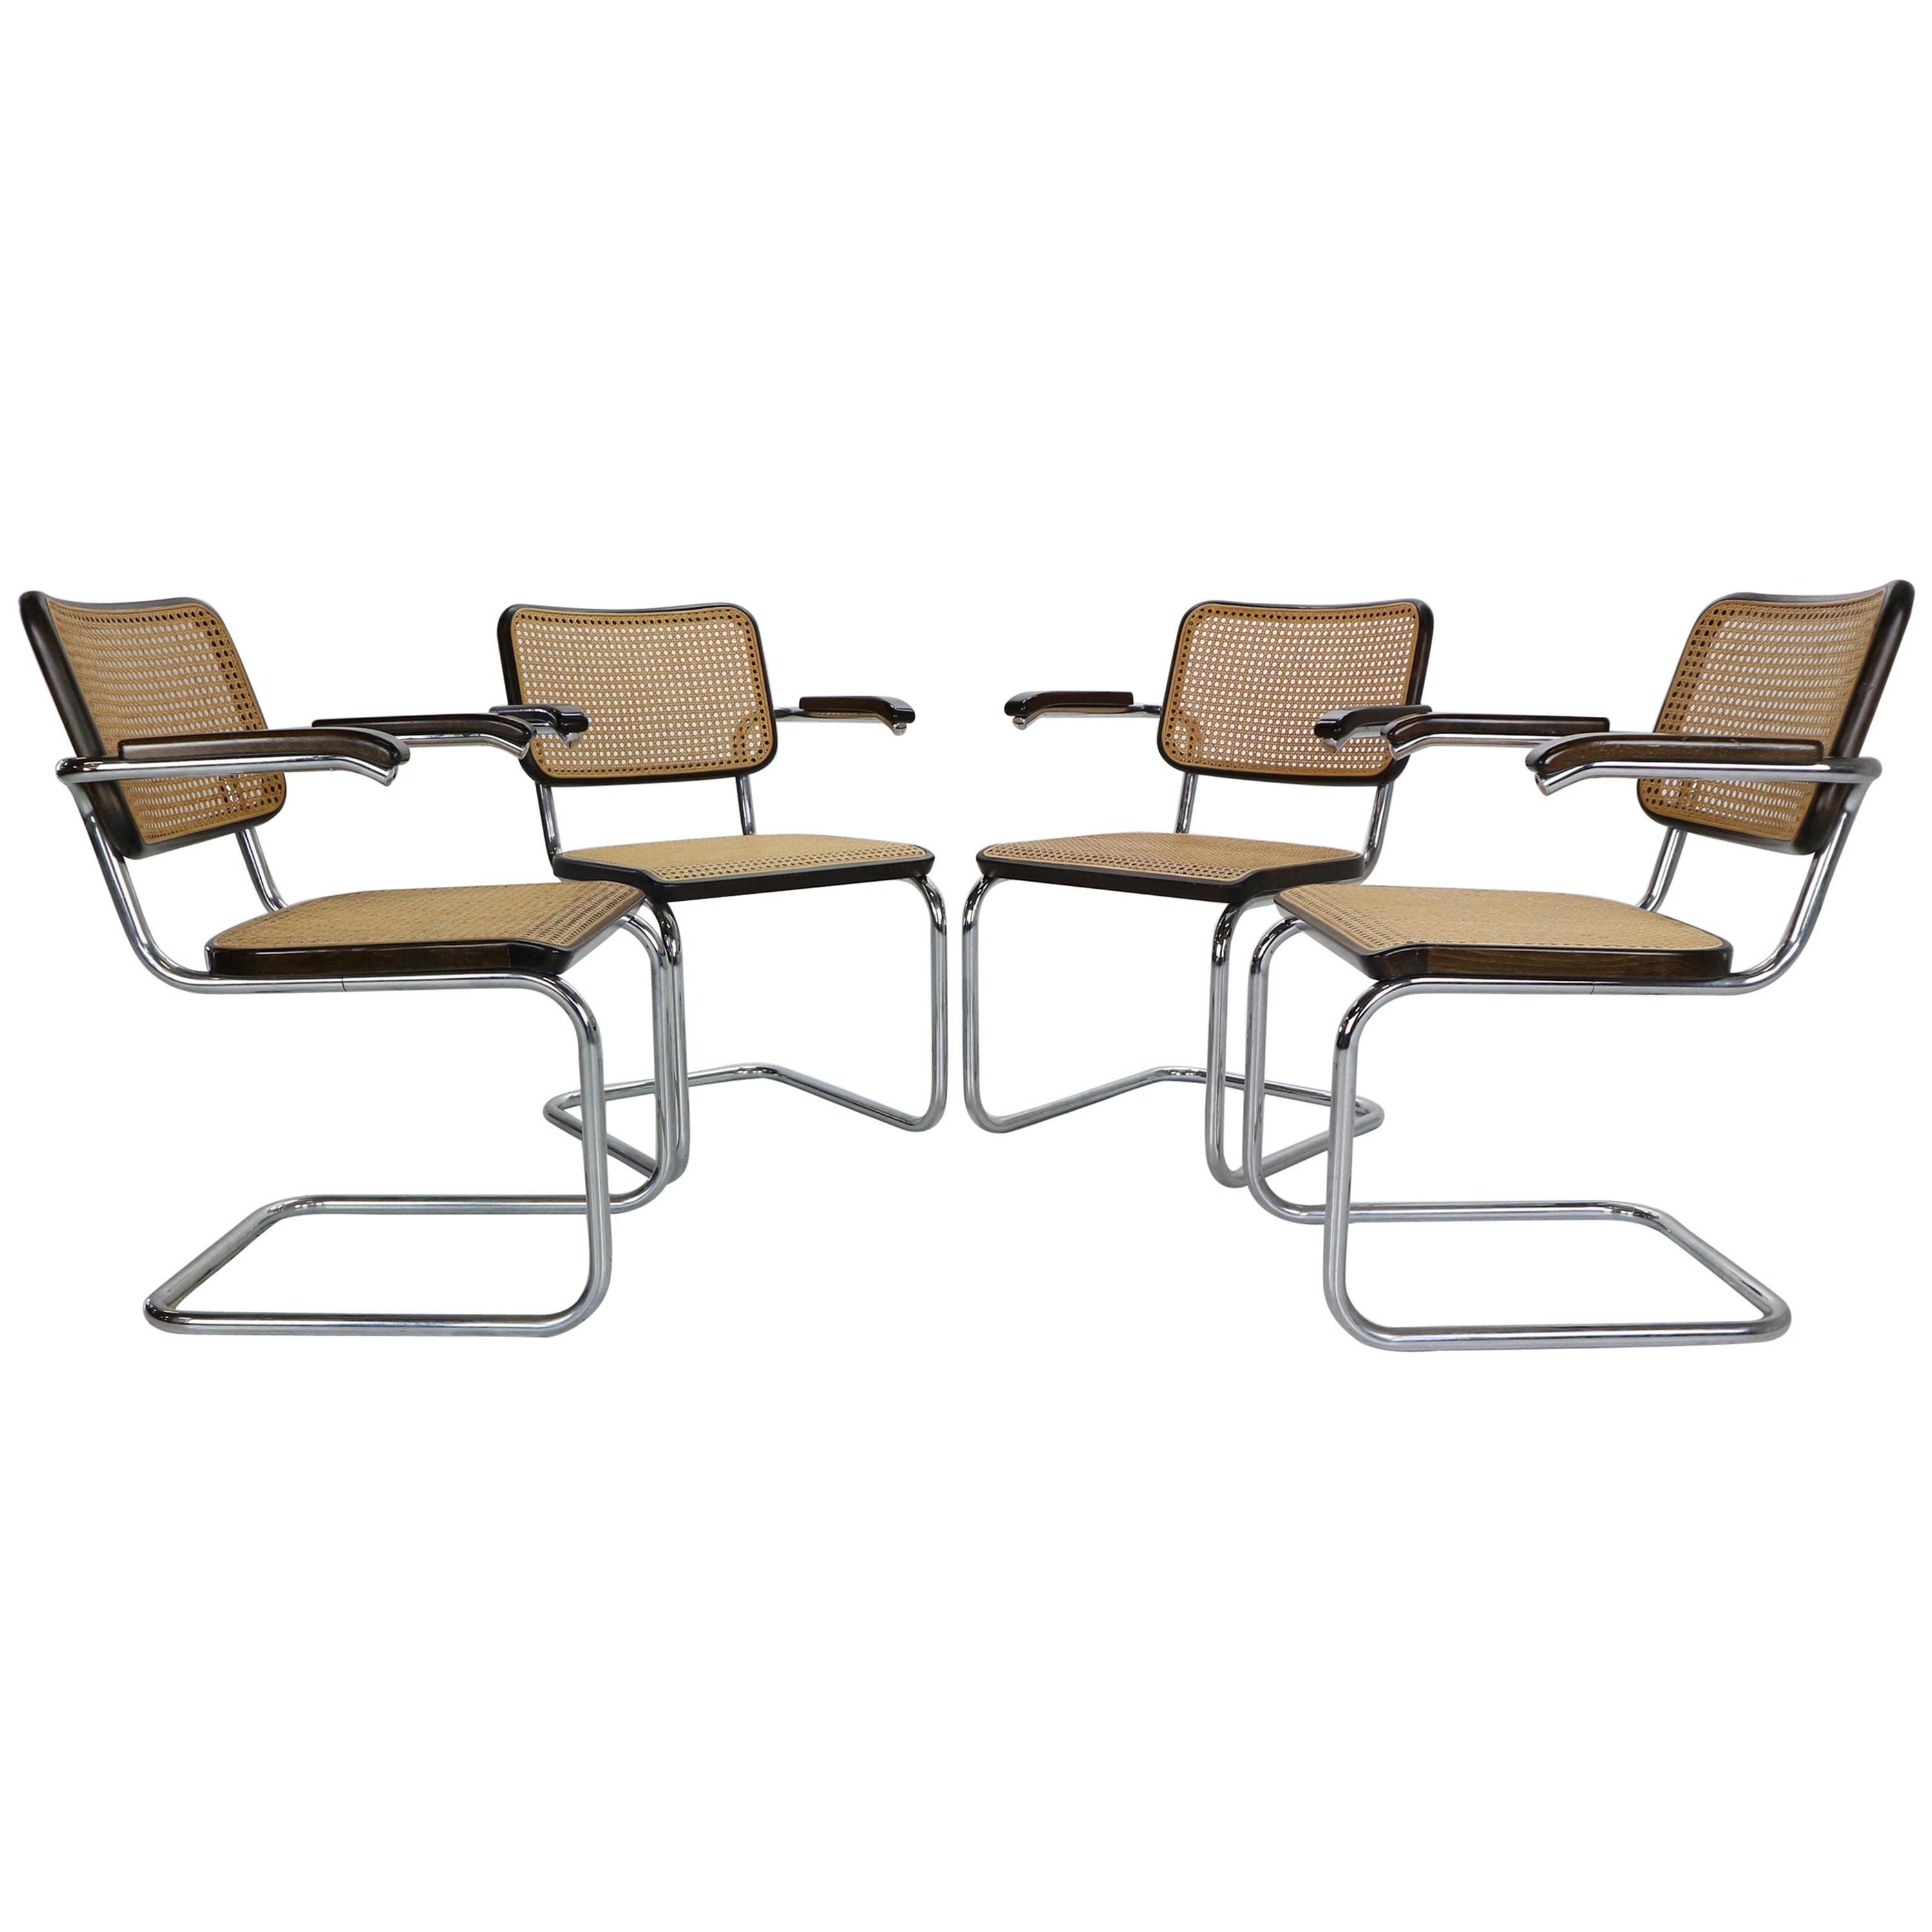 Marcel Breuer Original Set of 4 Model-S64 Chairs by Thonet